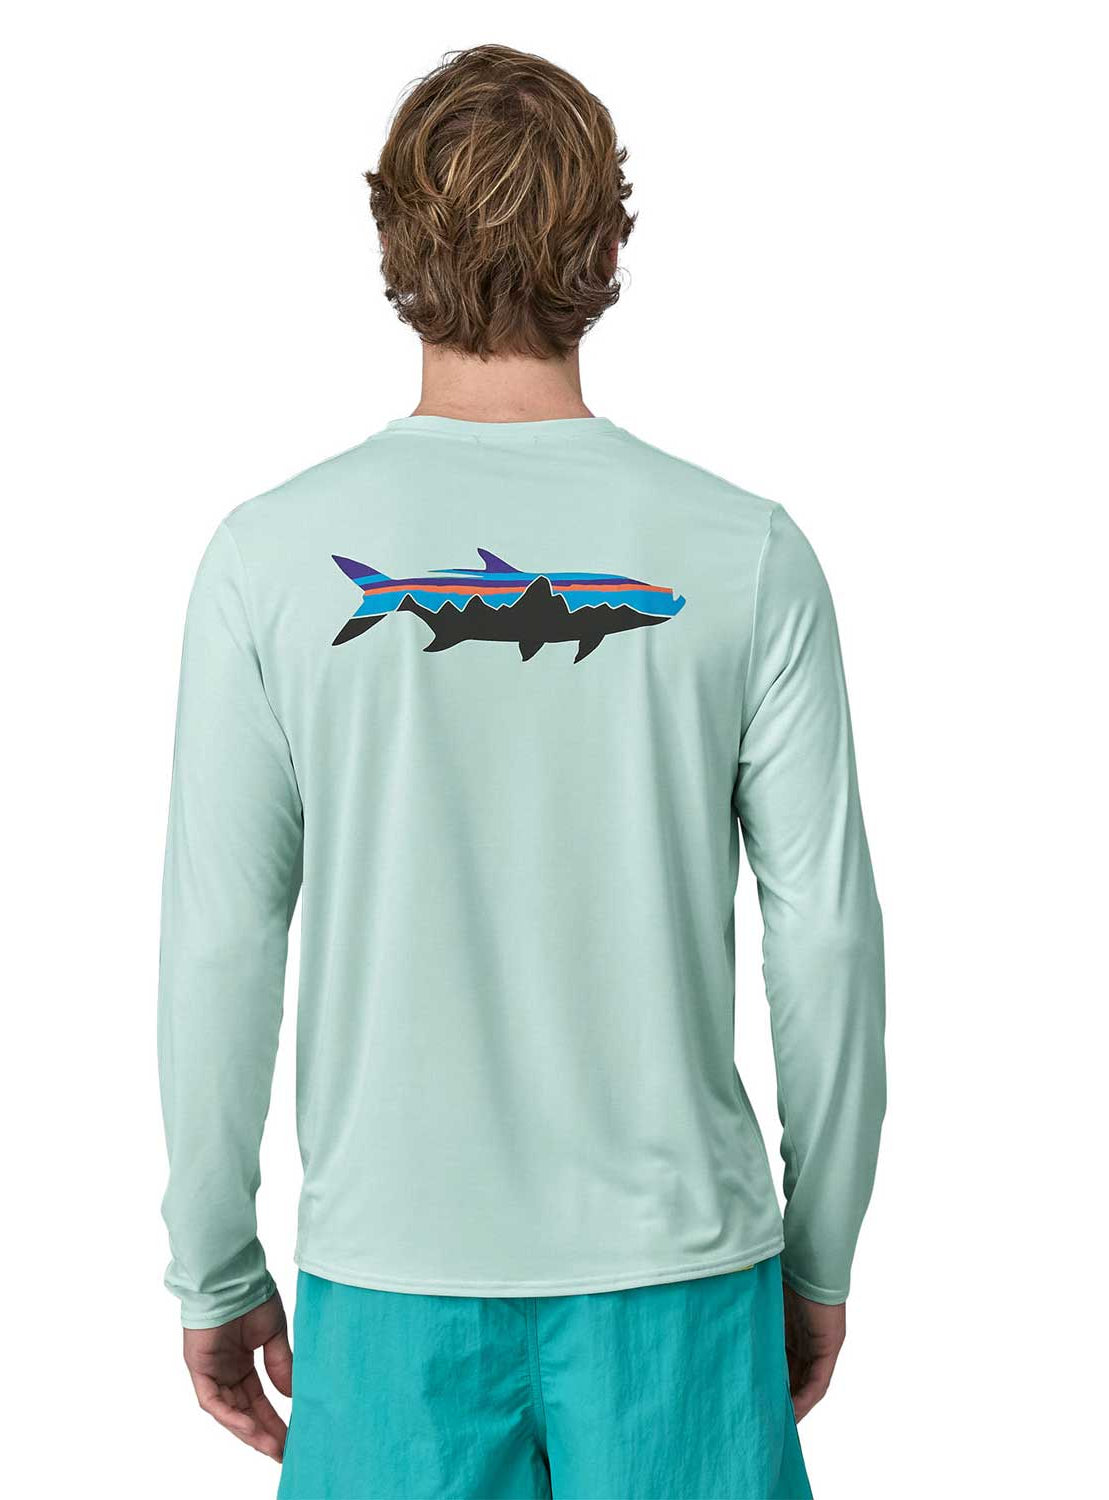 Patagonia: Men's Capilene Long Sleeve Cool Daily Graphic Shirt